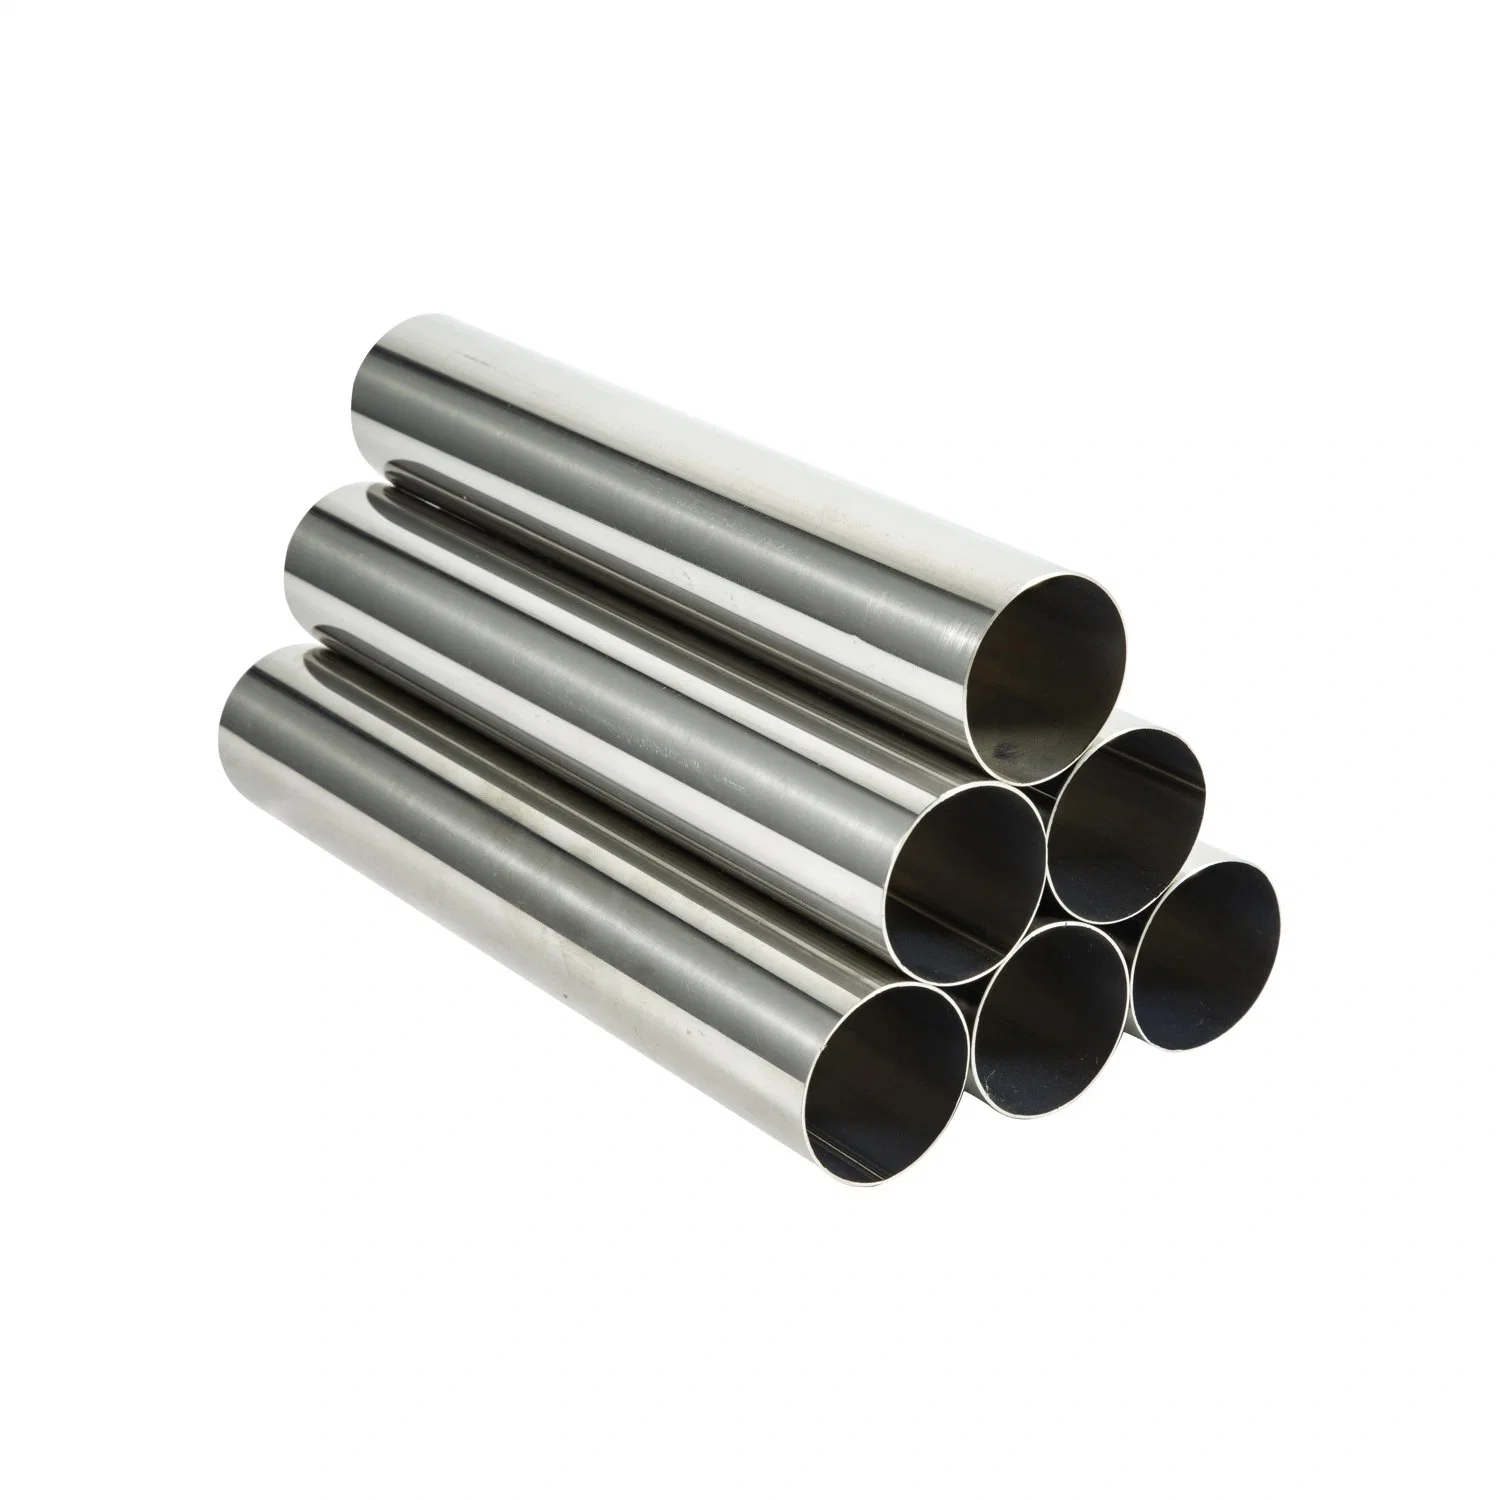 ASTM A249 Stainless Steel Tube